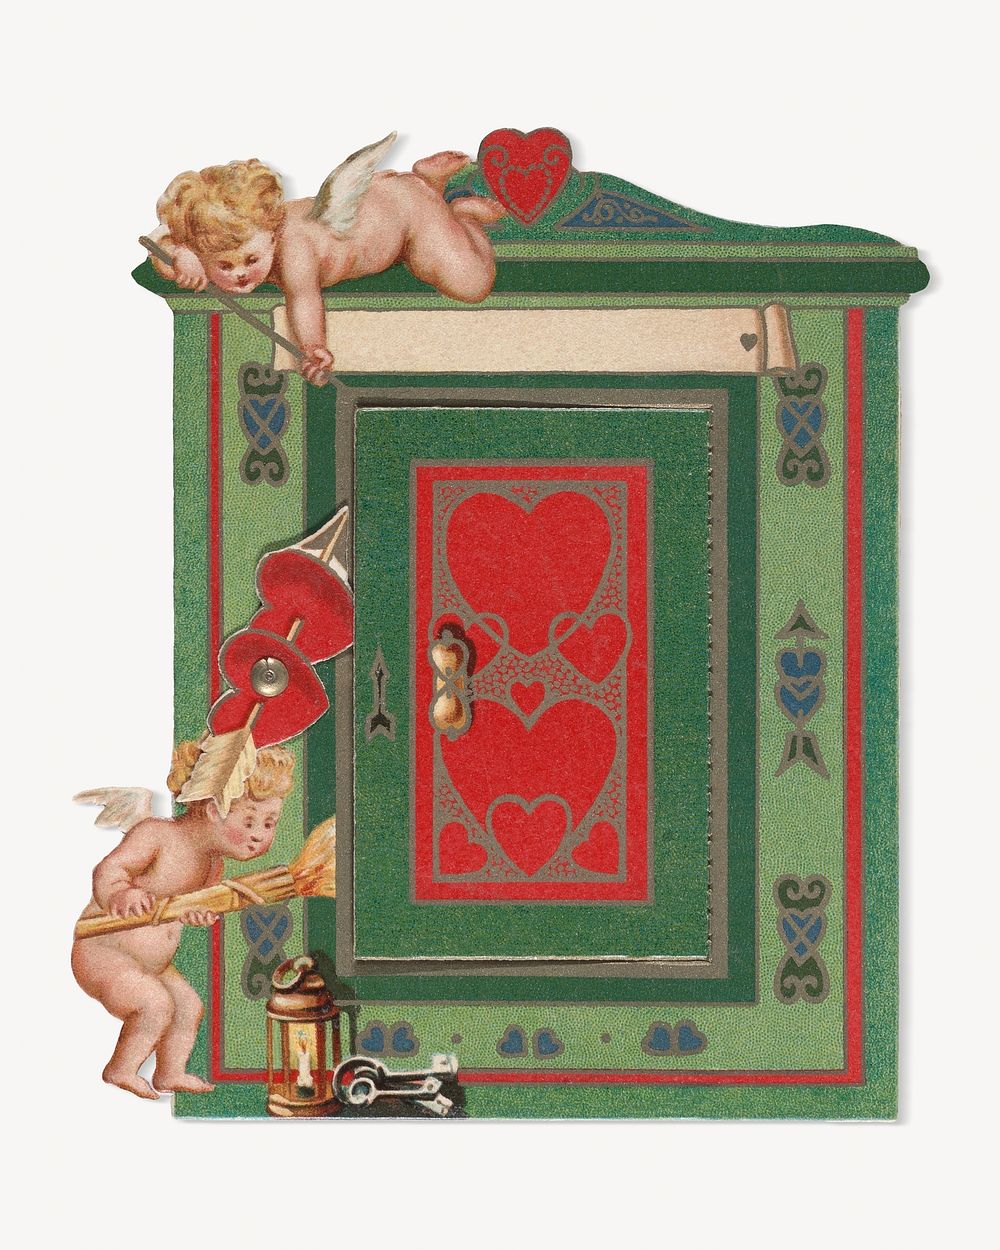 Valentine - Mechanical, Cupids with safe and money, vintage illustration. Remixed by rawpixel.